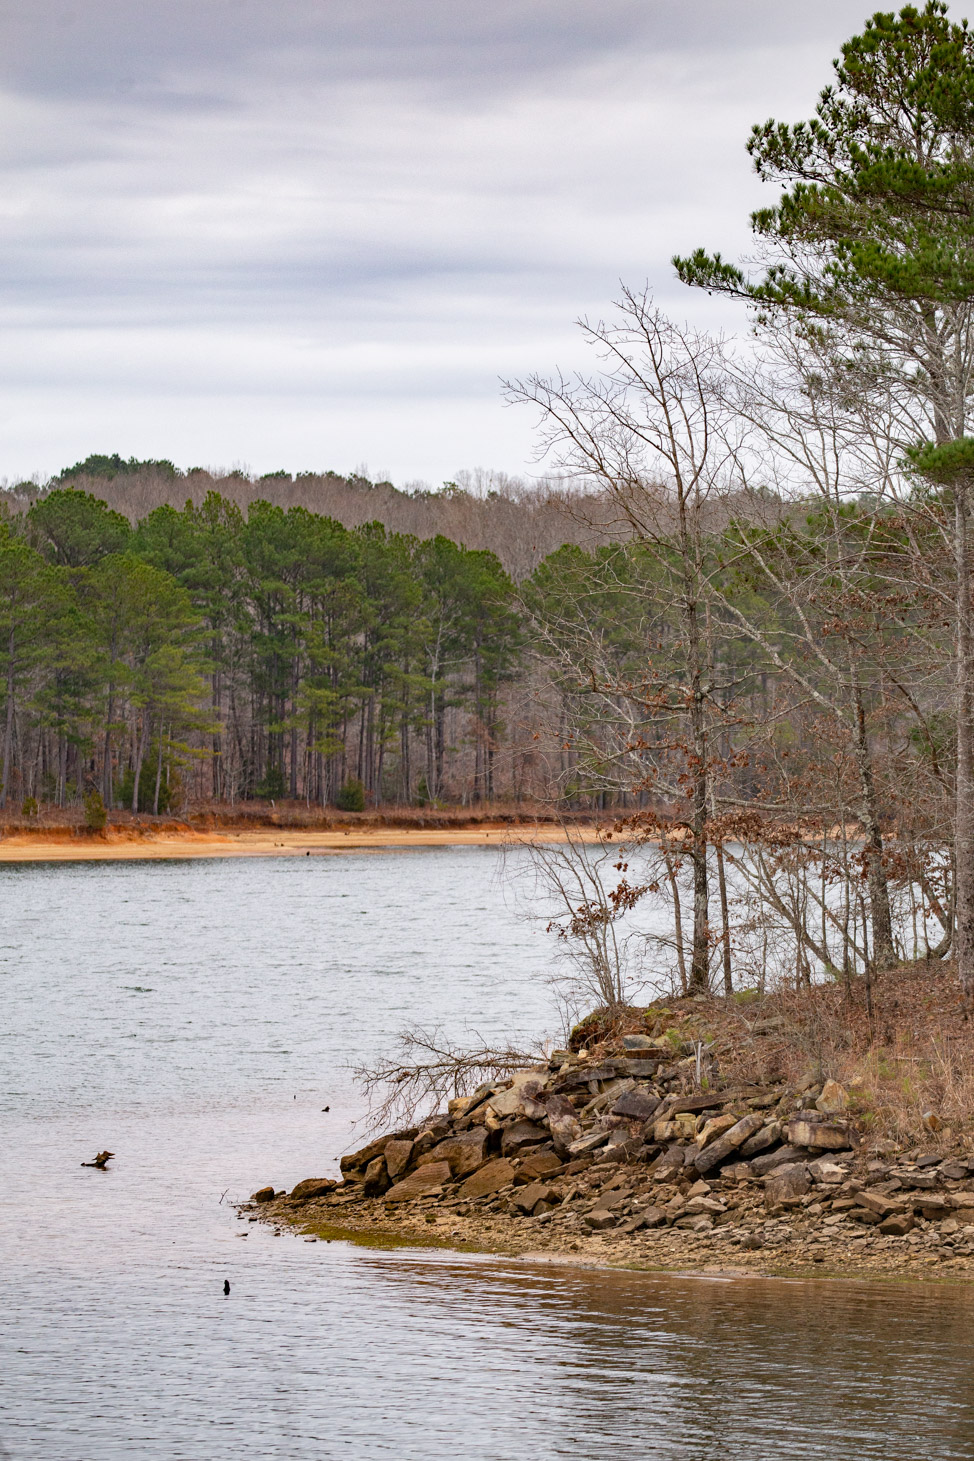 Bay Springs Lake along the Natchez Trace Parkway